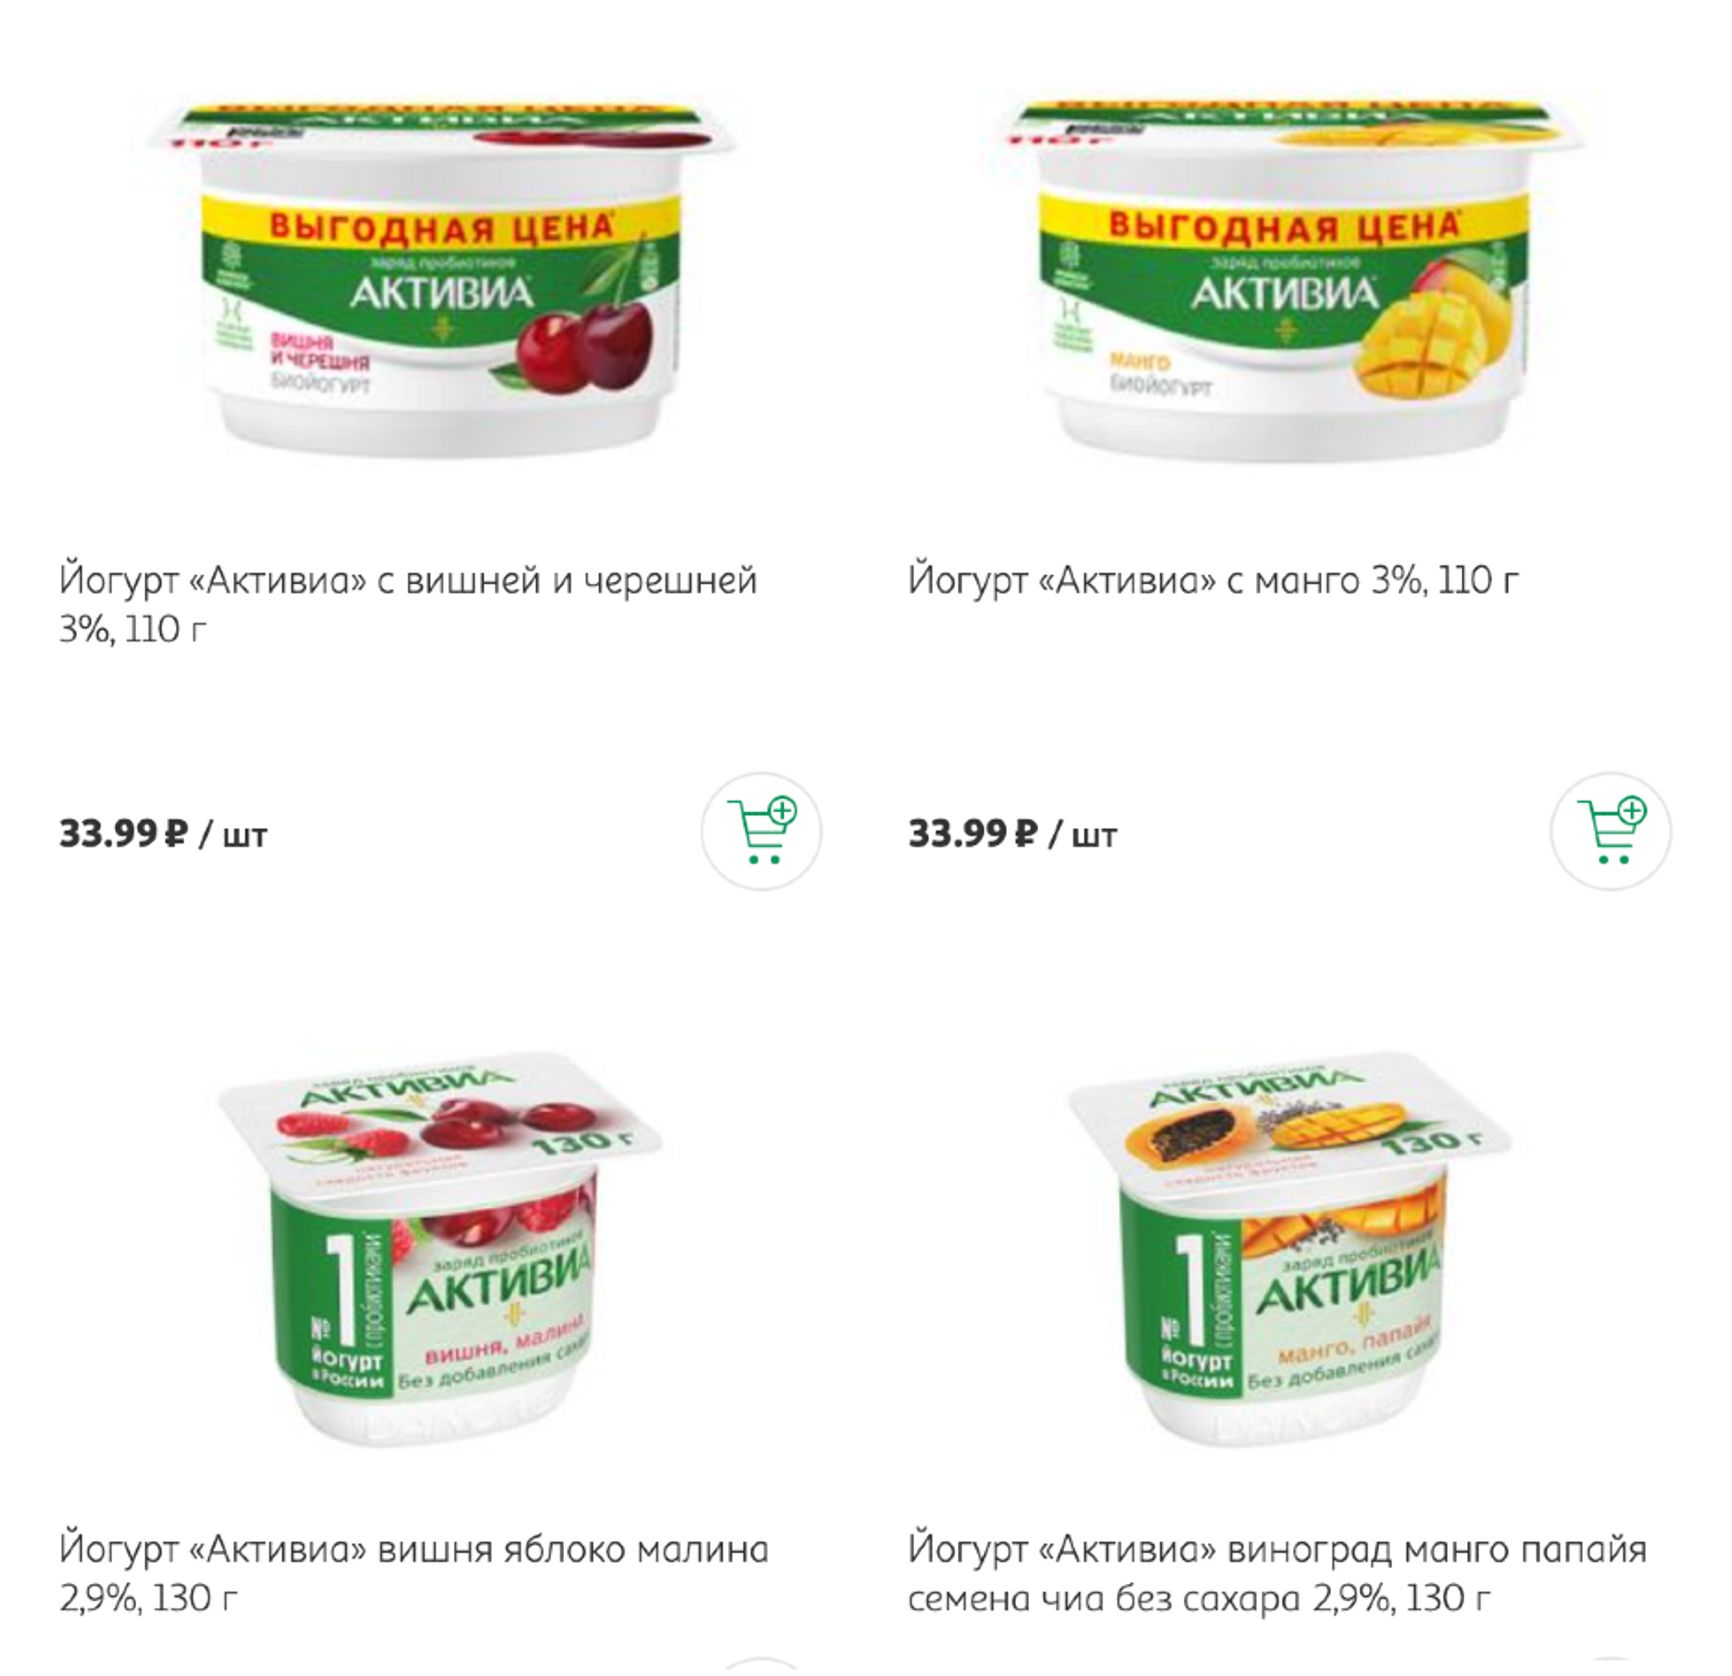 Another trick by Danone was to introduce a new, smaller cup for Activia yogurts, adding a caption “Bargain” (a screenshot from the Auchan online catalog, October 13, 2022)